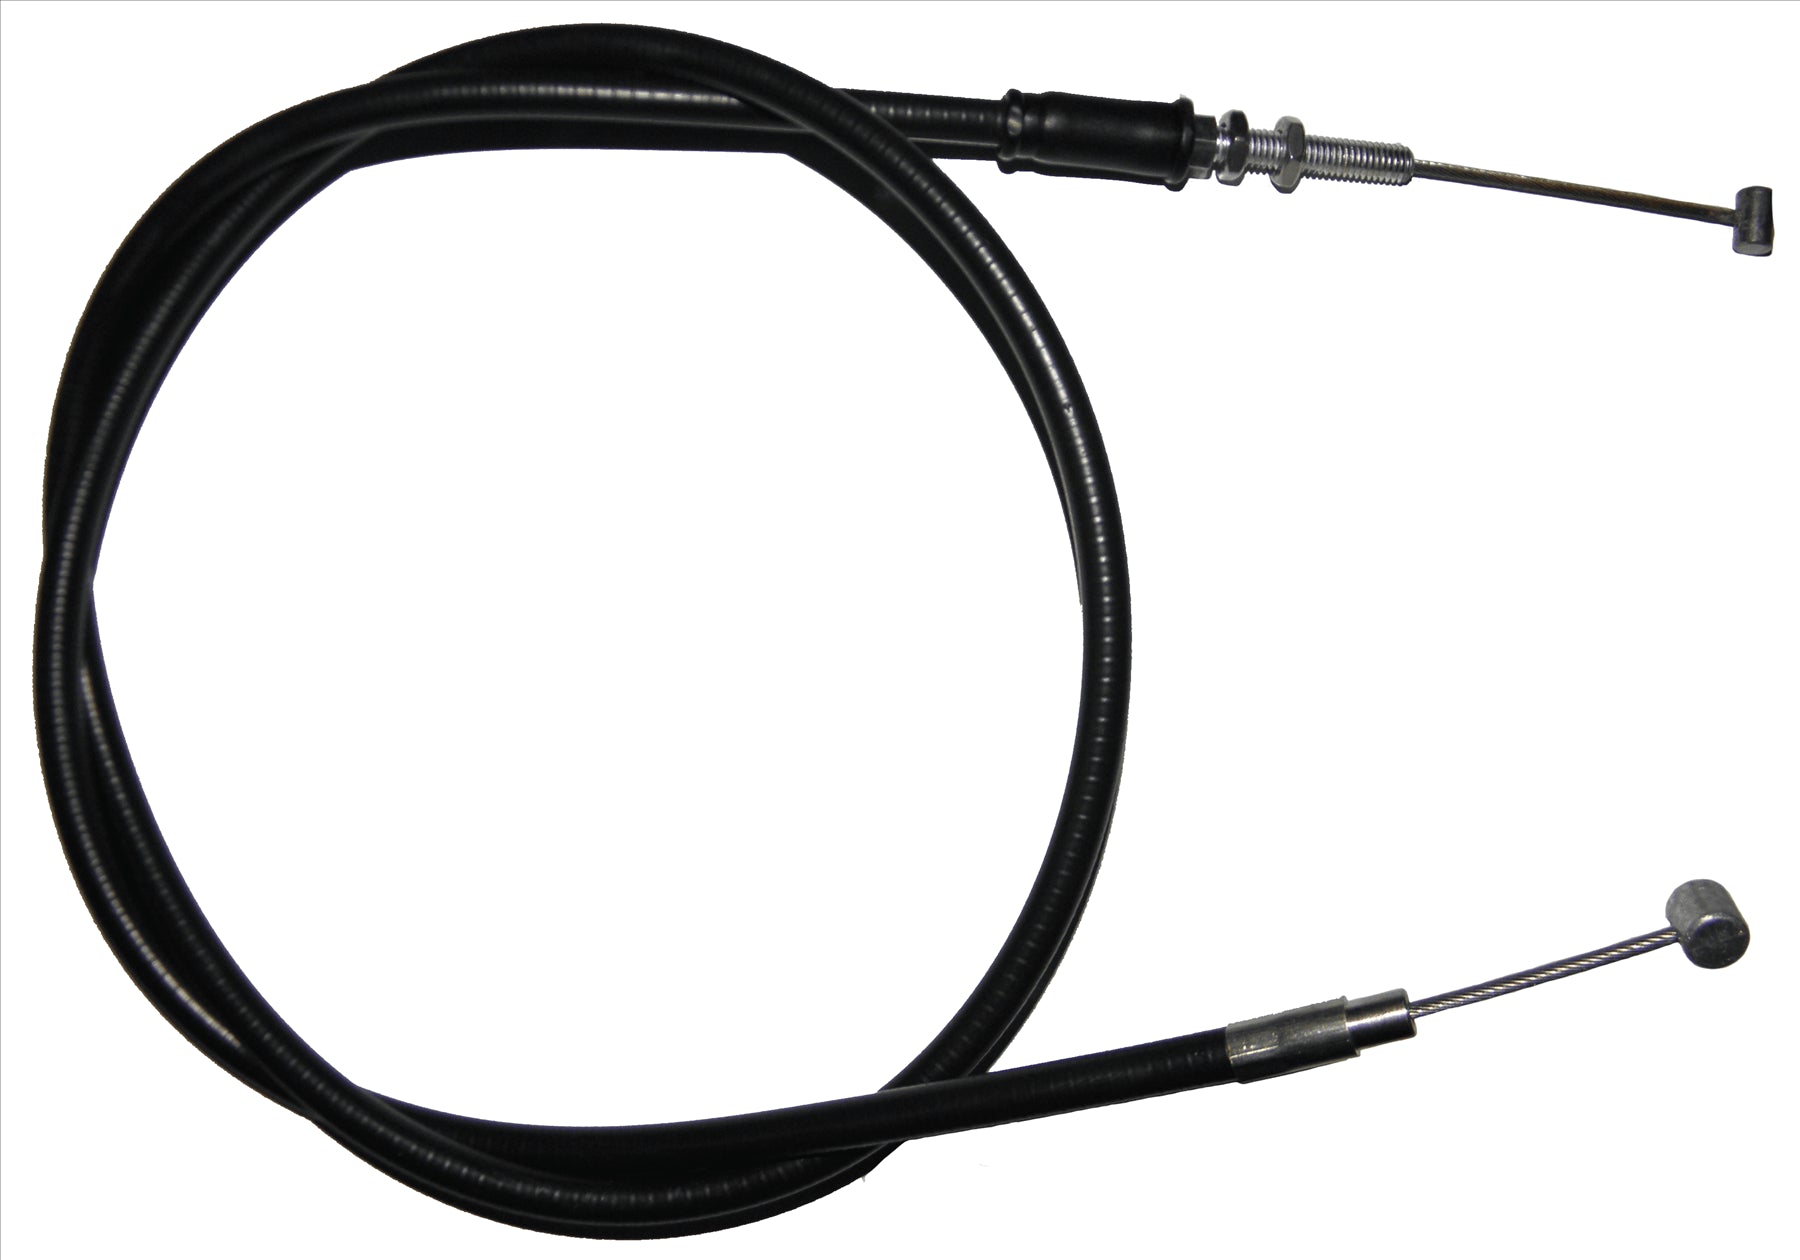 Apico Black Clutch Cable For Husaberg All Models 1989-1999